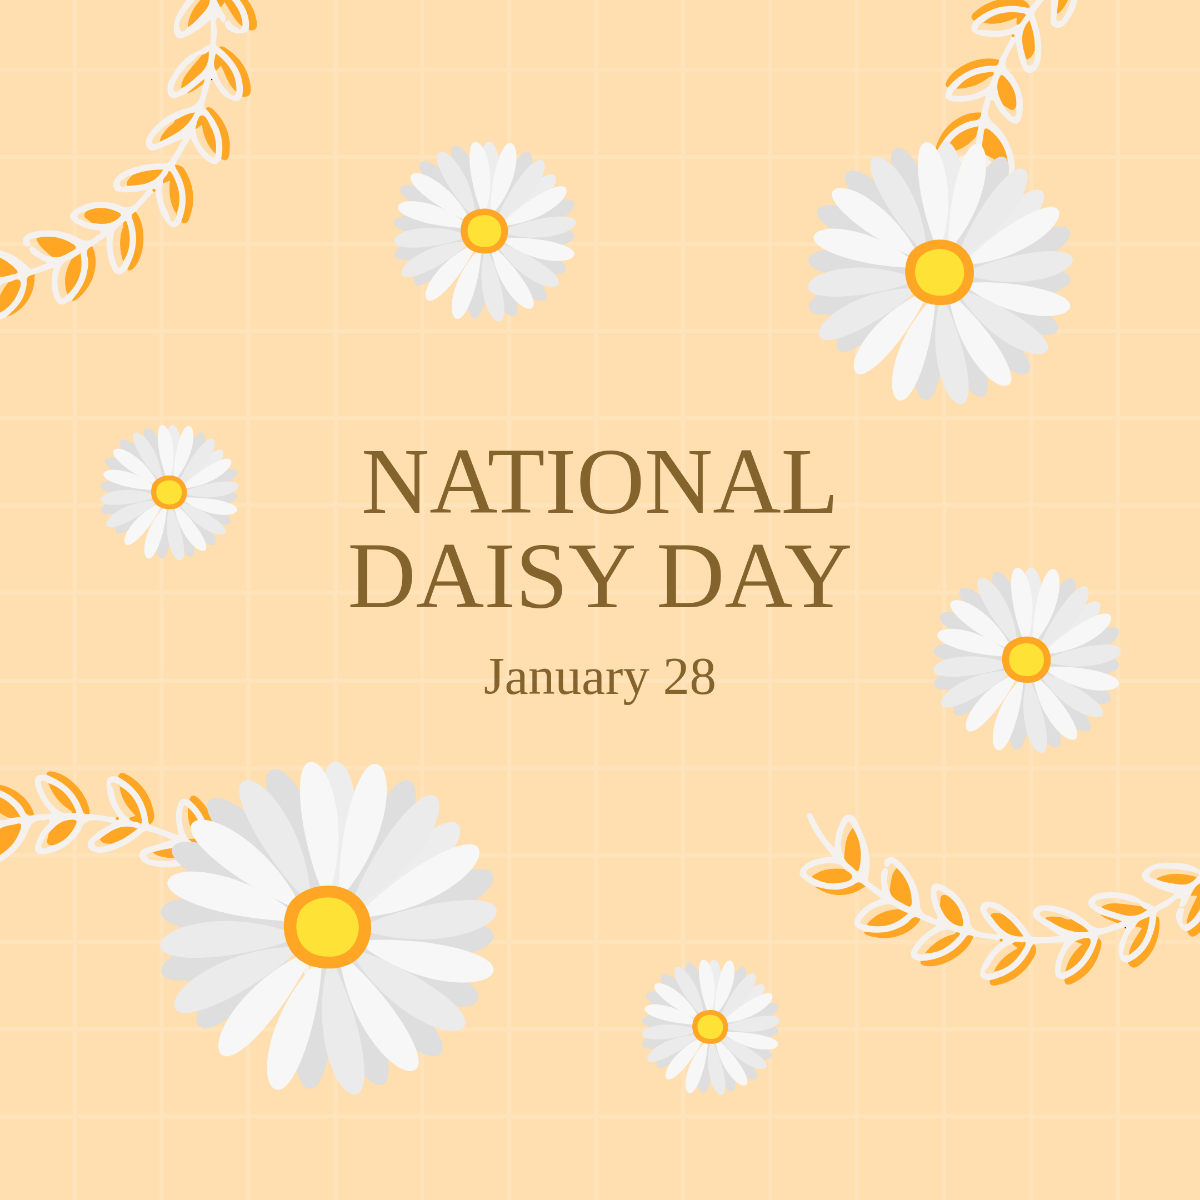 National Daisy Day Instagram Post Template